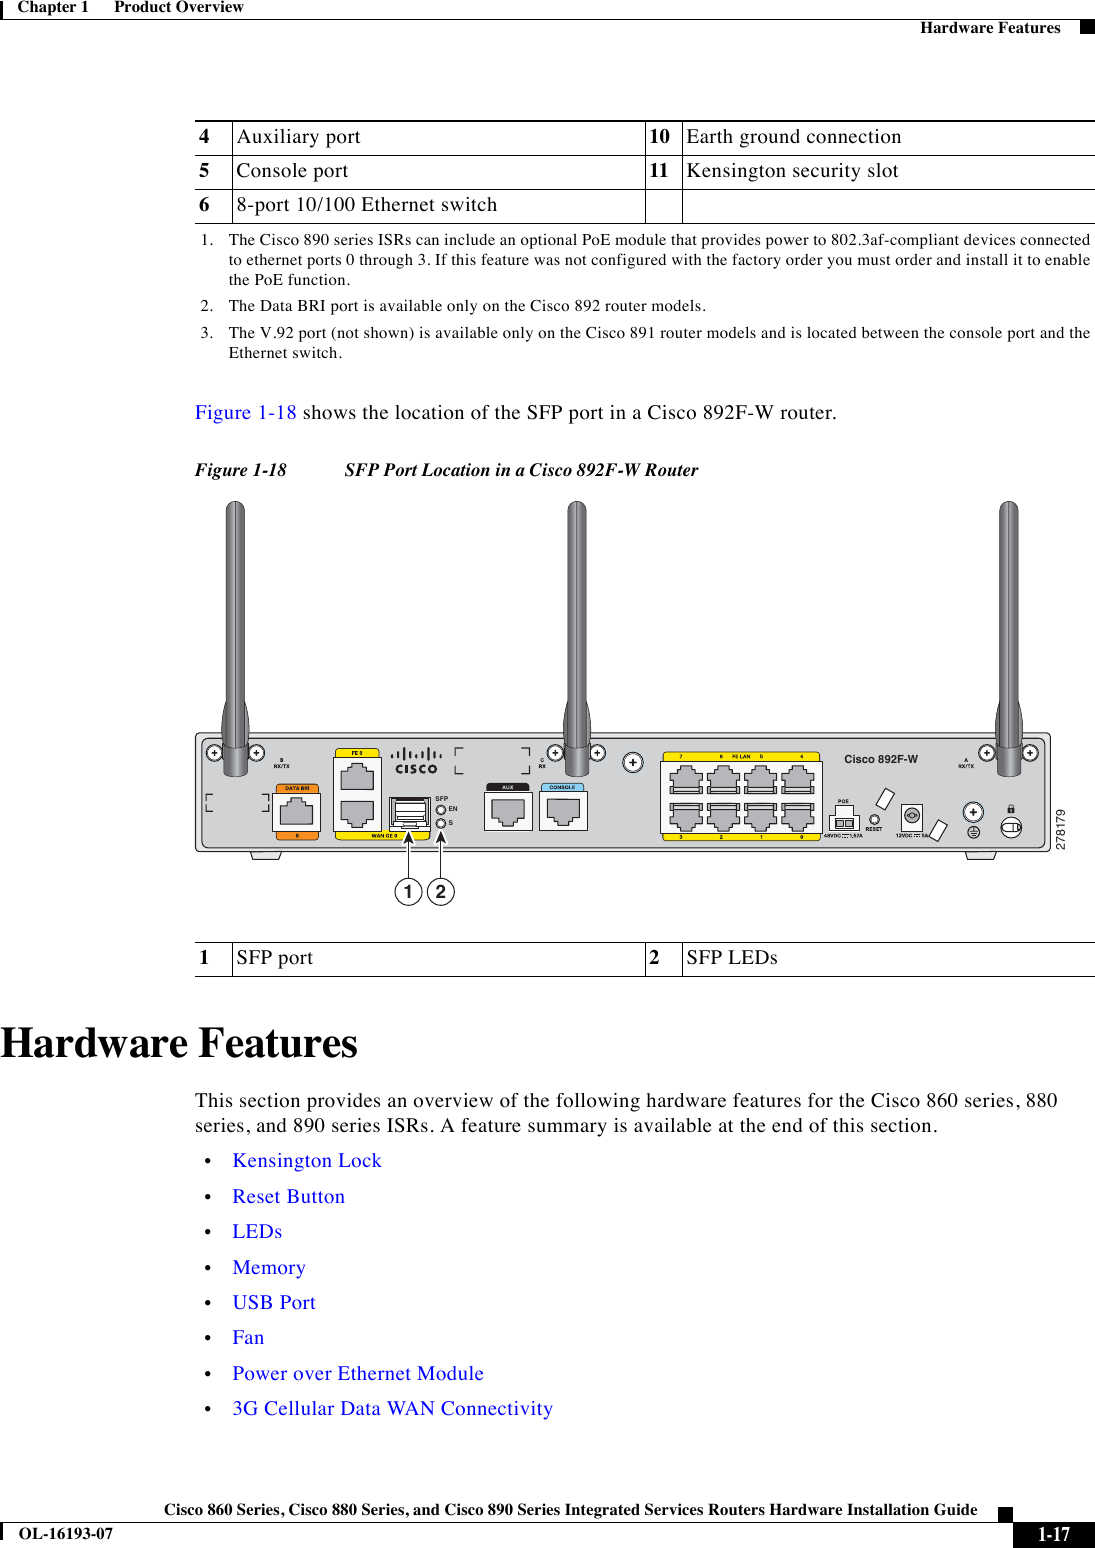  1-17Cisco 860 Series, Cisco 880 Series, and Cisco 890 Series Integrated Services Routers Hardware Installation GuideOL-16193-07Chapter 1      Product Overview  Hardware FeaturesFigure 1-18 shows the location of the SFP port in a Cisco 892F-W router.Figure 1-18 SFP Port Location in a Cisco 892F-W RouterHardware FeaturesThis section provides an overview of the following hardware features for the Cisco 860 series, 880 series, and 890 series ISRs. A feature summary is available at the end of this section.  •Kensington Lock  •Reset Button  •LEDs  •Memory  •USB Port  •Fan  •Power over Ethernet Module  •3G Cellular Data WAN Connectivity4Auxiliary port 10 Earth ground connection5Console port  11 Kensington security slot68-port 10/100 Ethernet switch1. The Cisco 890 series ISRs can include an optional PoE module that provides power to 802.3af-compliant devices connected to ethernet ports 0 through 3. If this feature was not configured with the factory order you must order and install it to enable the PoE function.2. The Data BRI port is available only on the Cisco 892 router models.3. The V.92 port (not shown) is available only on the Cisco 891 router models and is located between the console port and the Ethernet switch.1SFP port 2SFP LEDs278179Cisco 892F-WSFPENS21